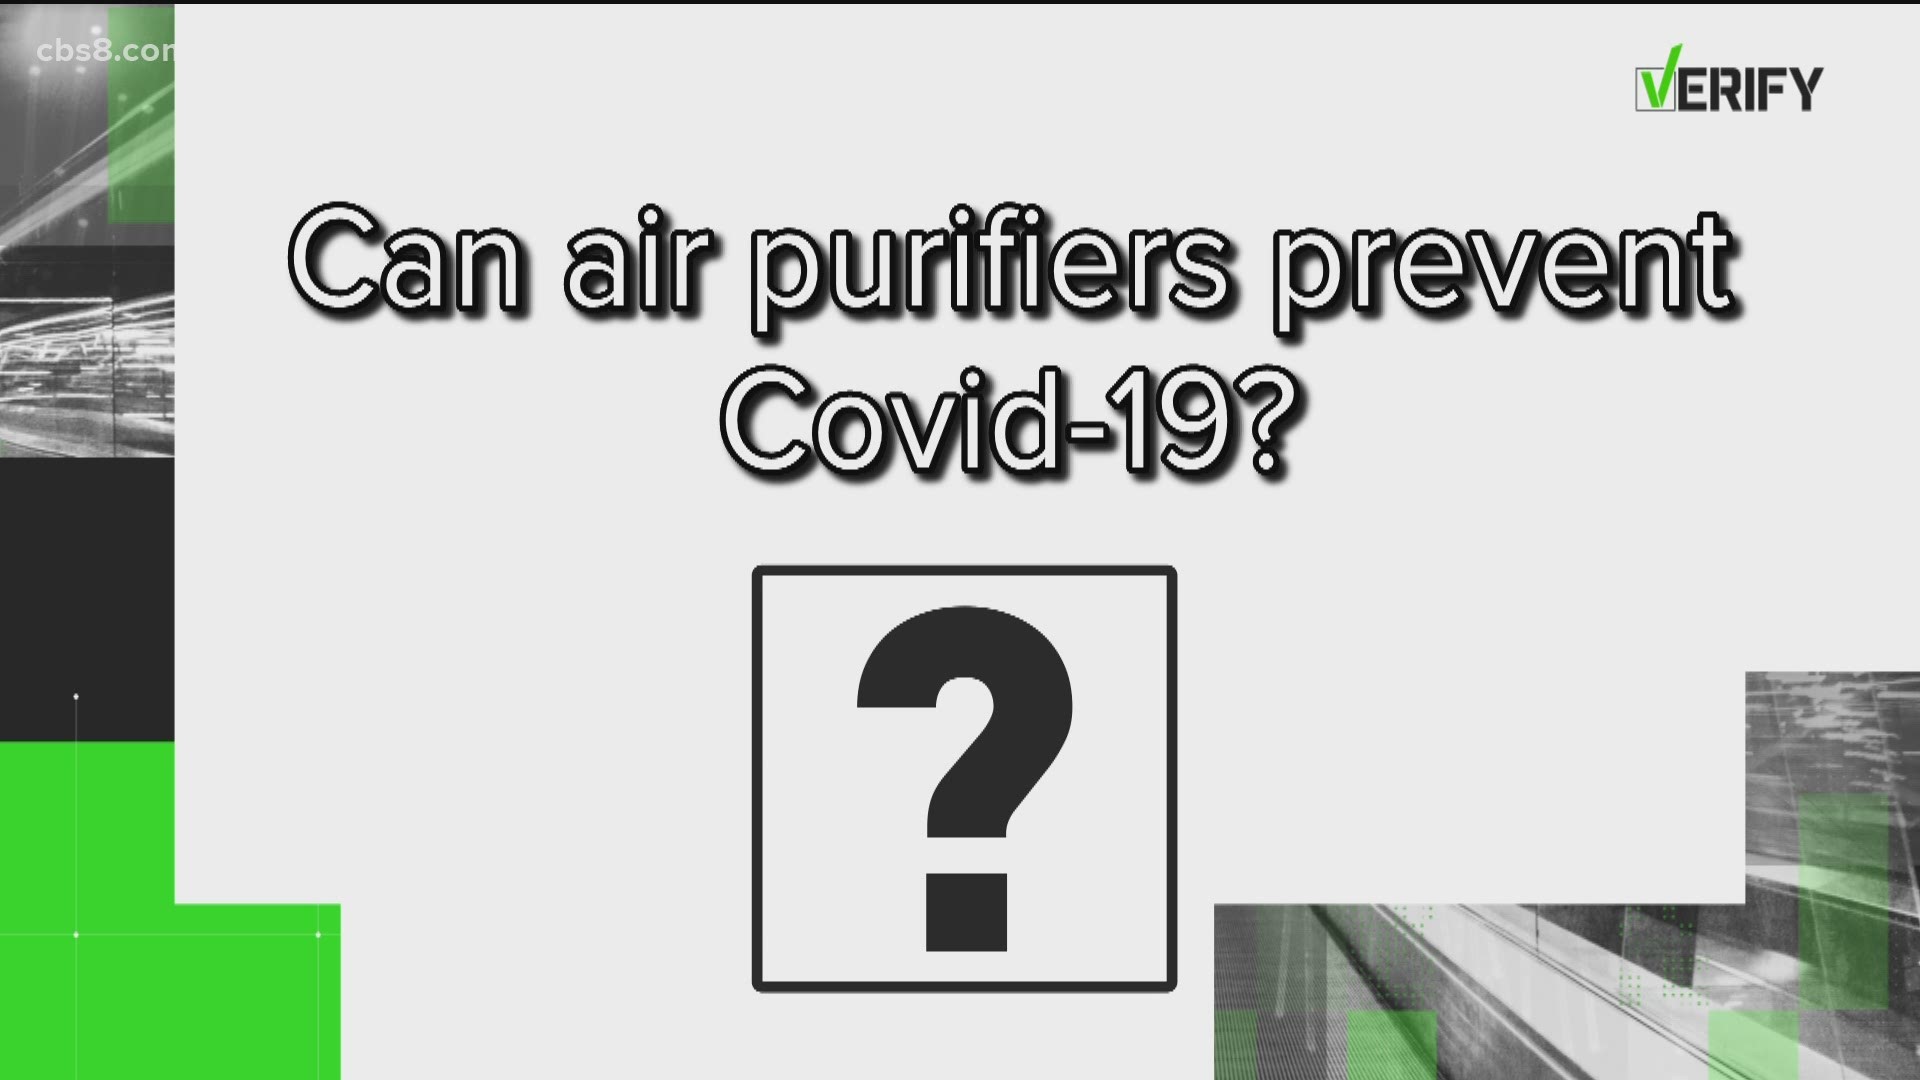 Studies show the coronavirus is airborne and can spread more easily in enclosed spaces and air purifiers are designed to reduce airborne contaminants.